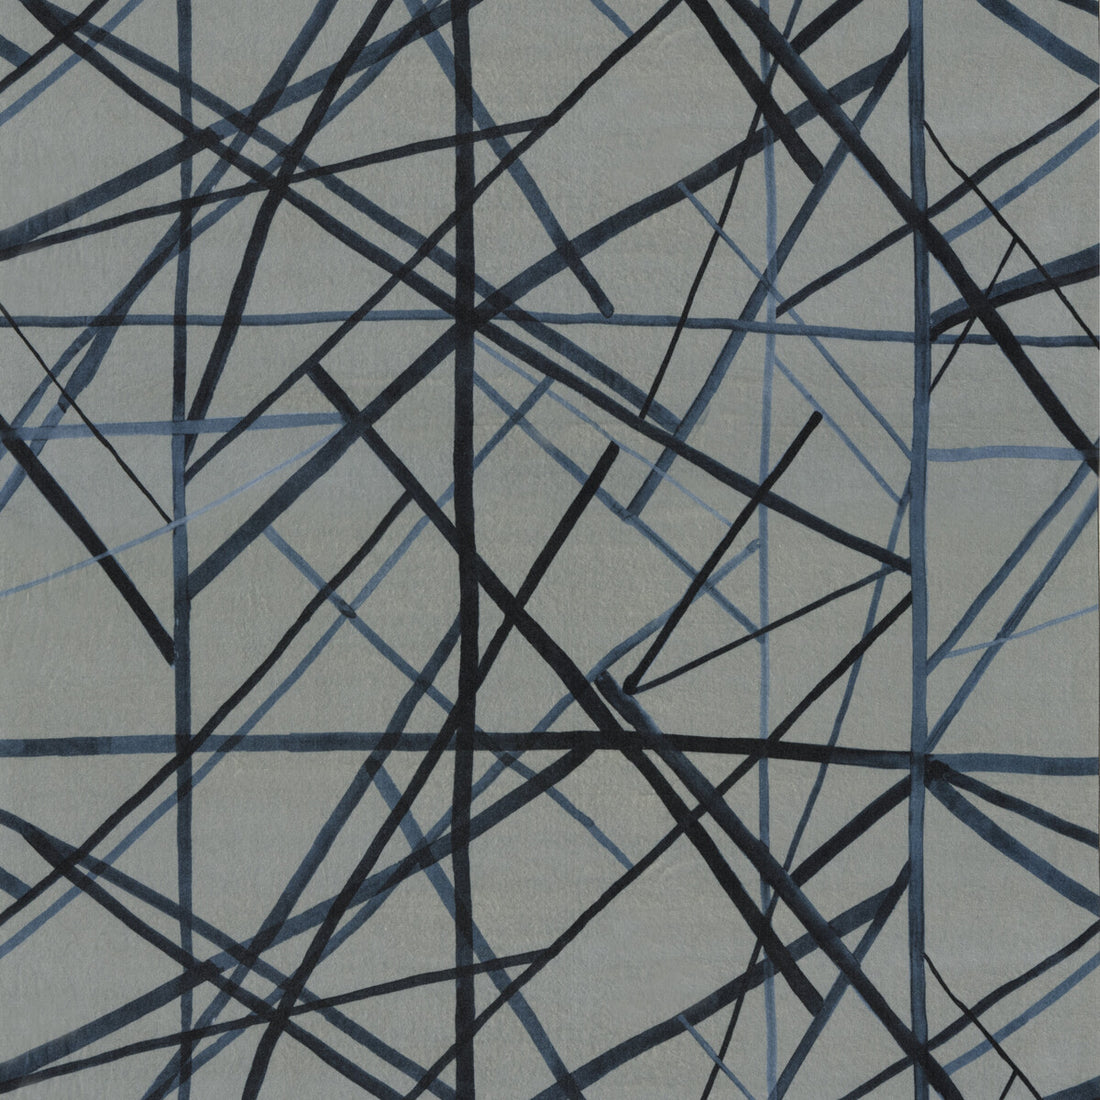 Channels Velvet fabric in slate/blue color - pattern GWF-3731.155.0 - by Lee Jofa Modern in the Kelly Wearstler IV collection